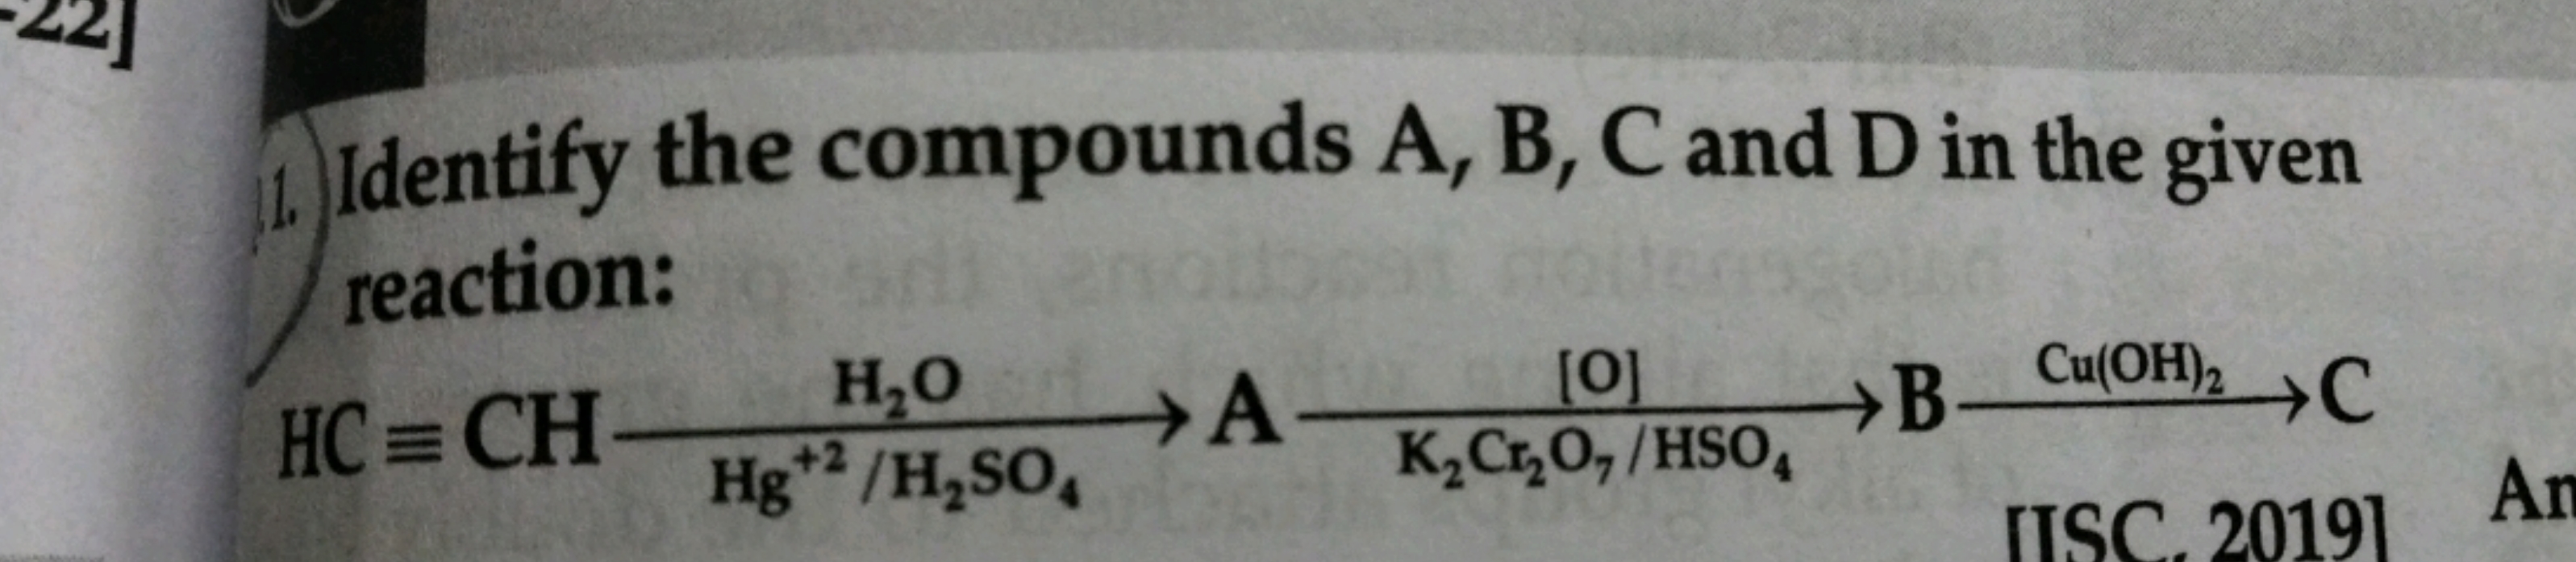 1.) Identify the compounds A, B, C and D in the given reaction:
\[
\ma